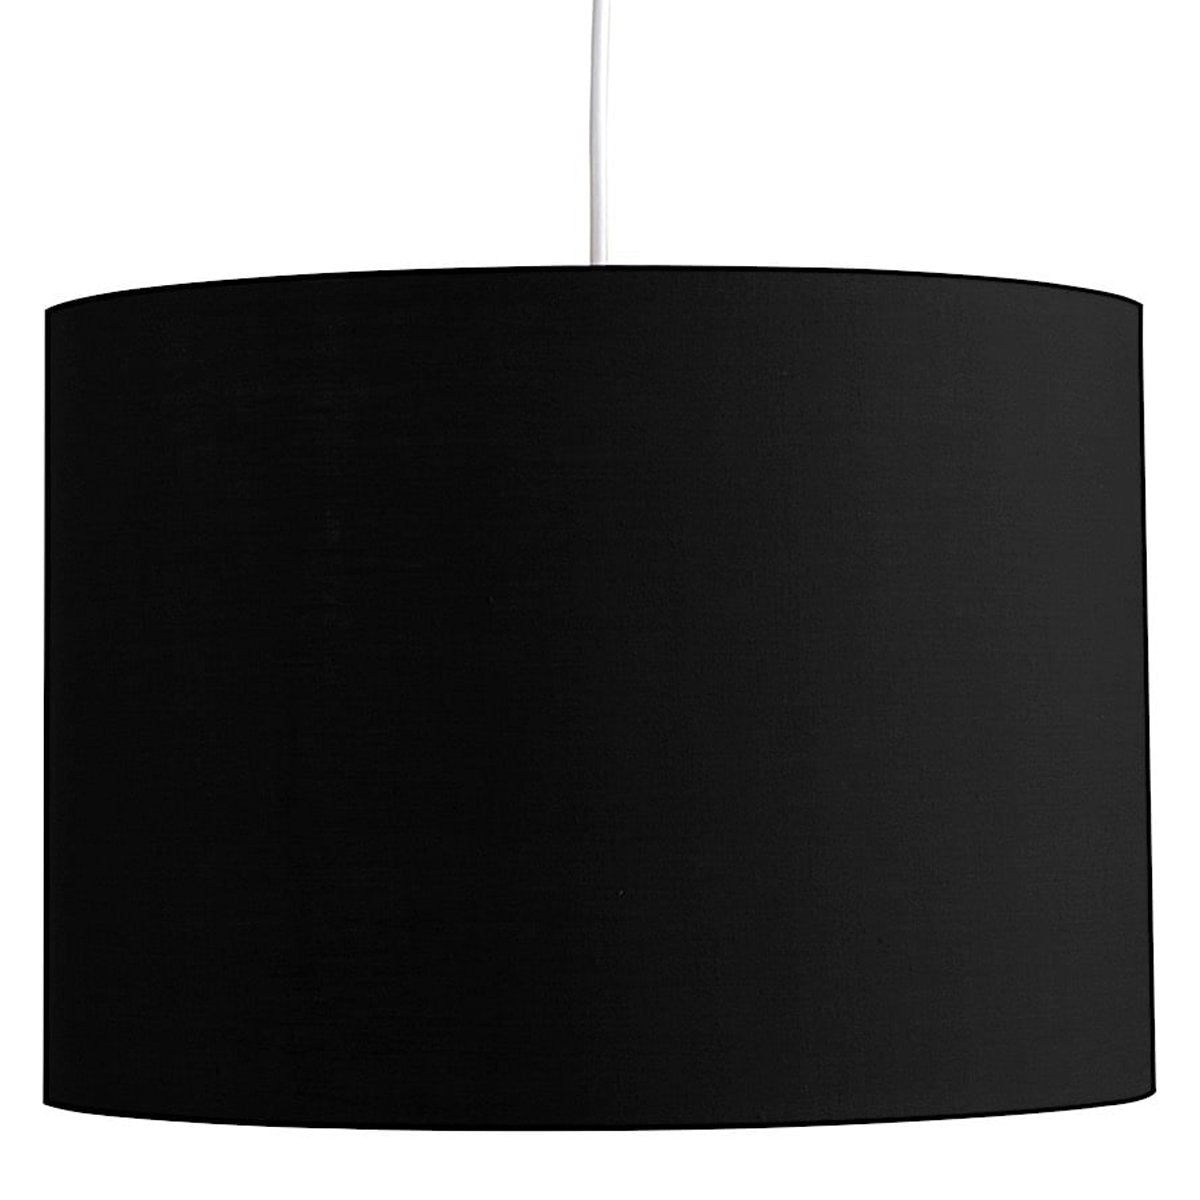 CGC LUPO Luxury Black & Inner Gold Cotton Round Easy Fit Lamp Shade